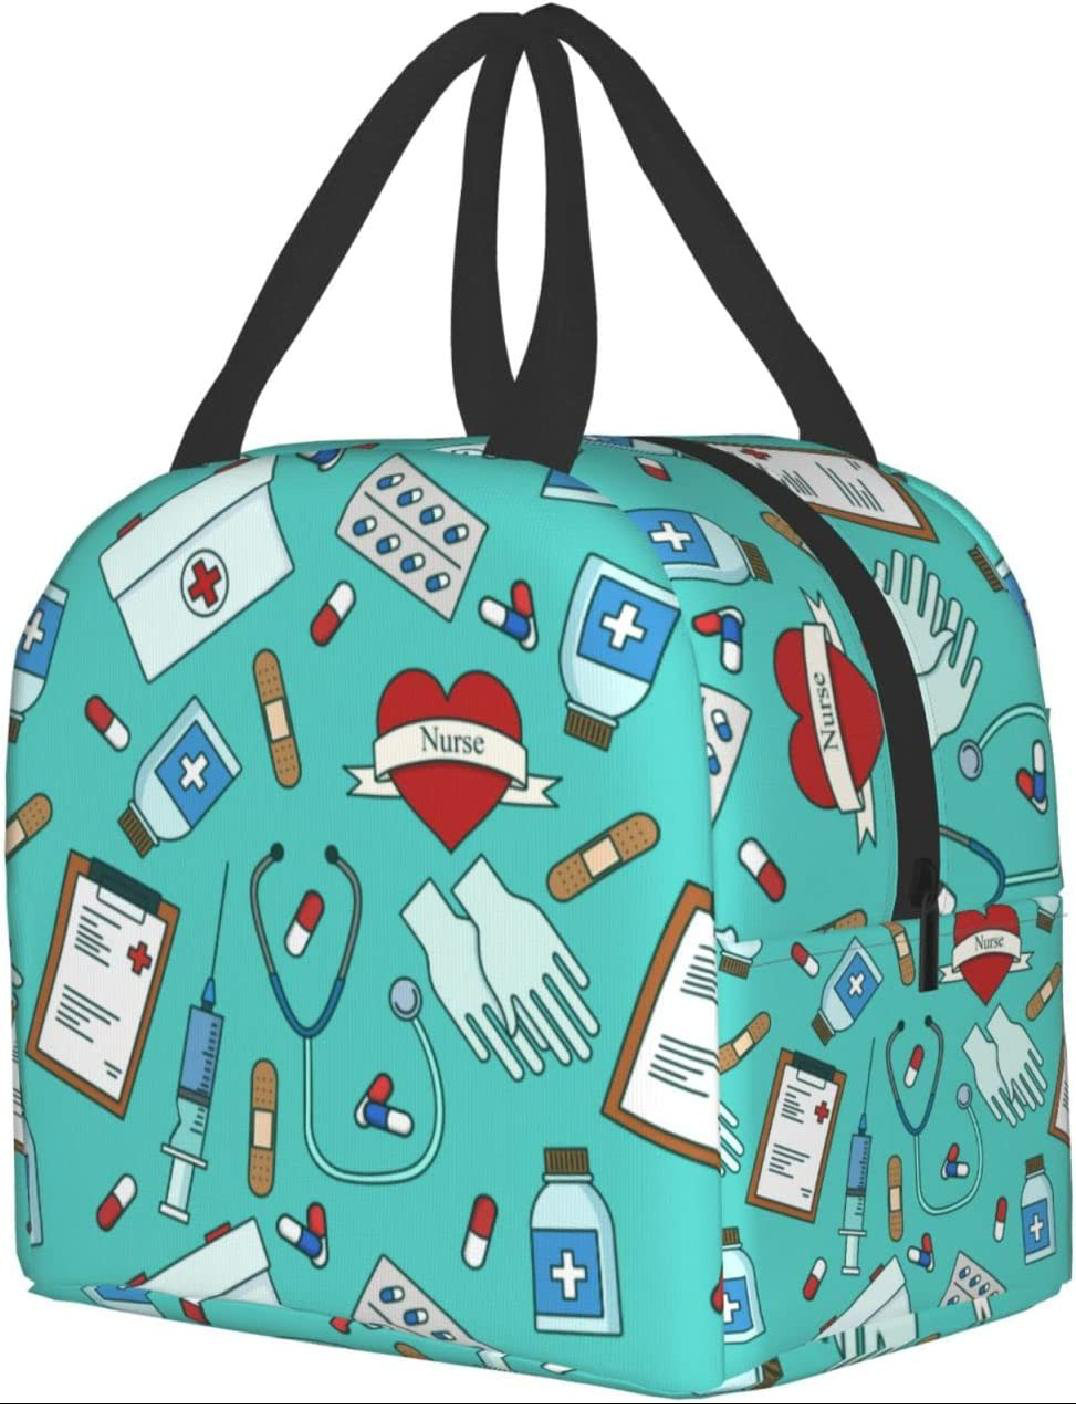 Reusable Insulated Lunch Bag East Urban Home